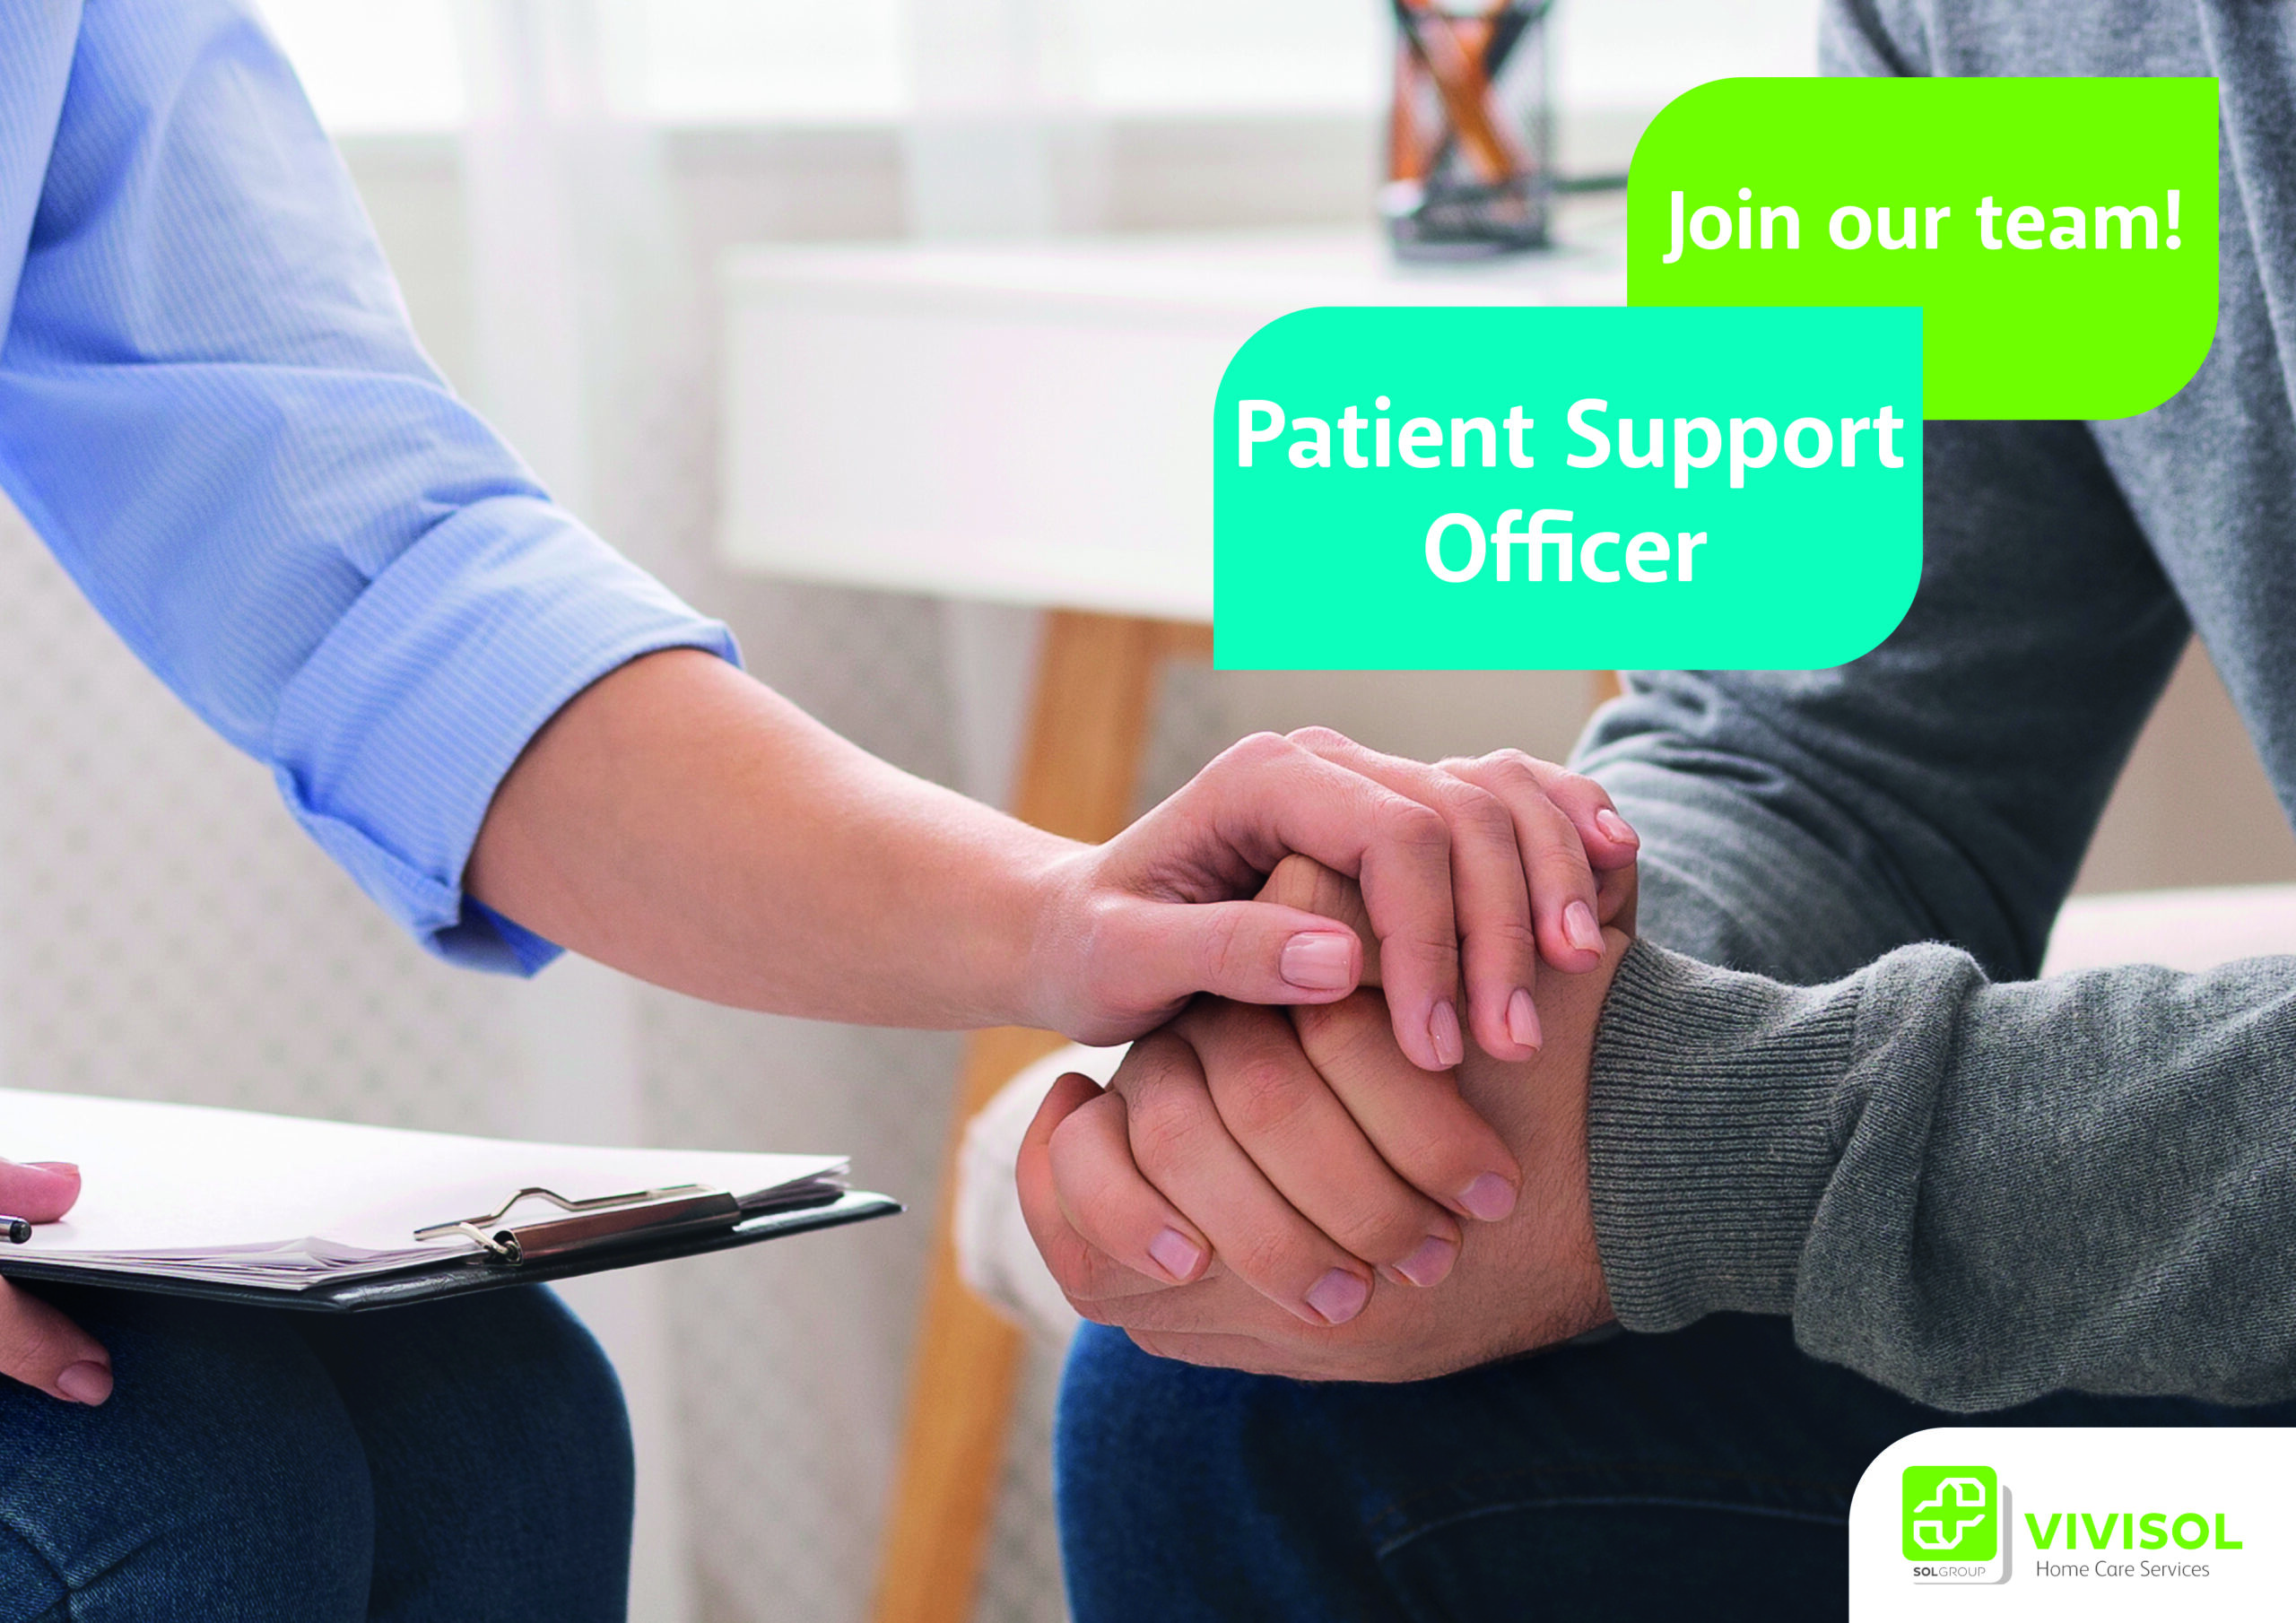 PATIENT SUPPORT OFFICER